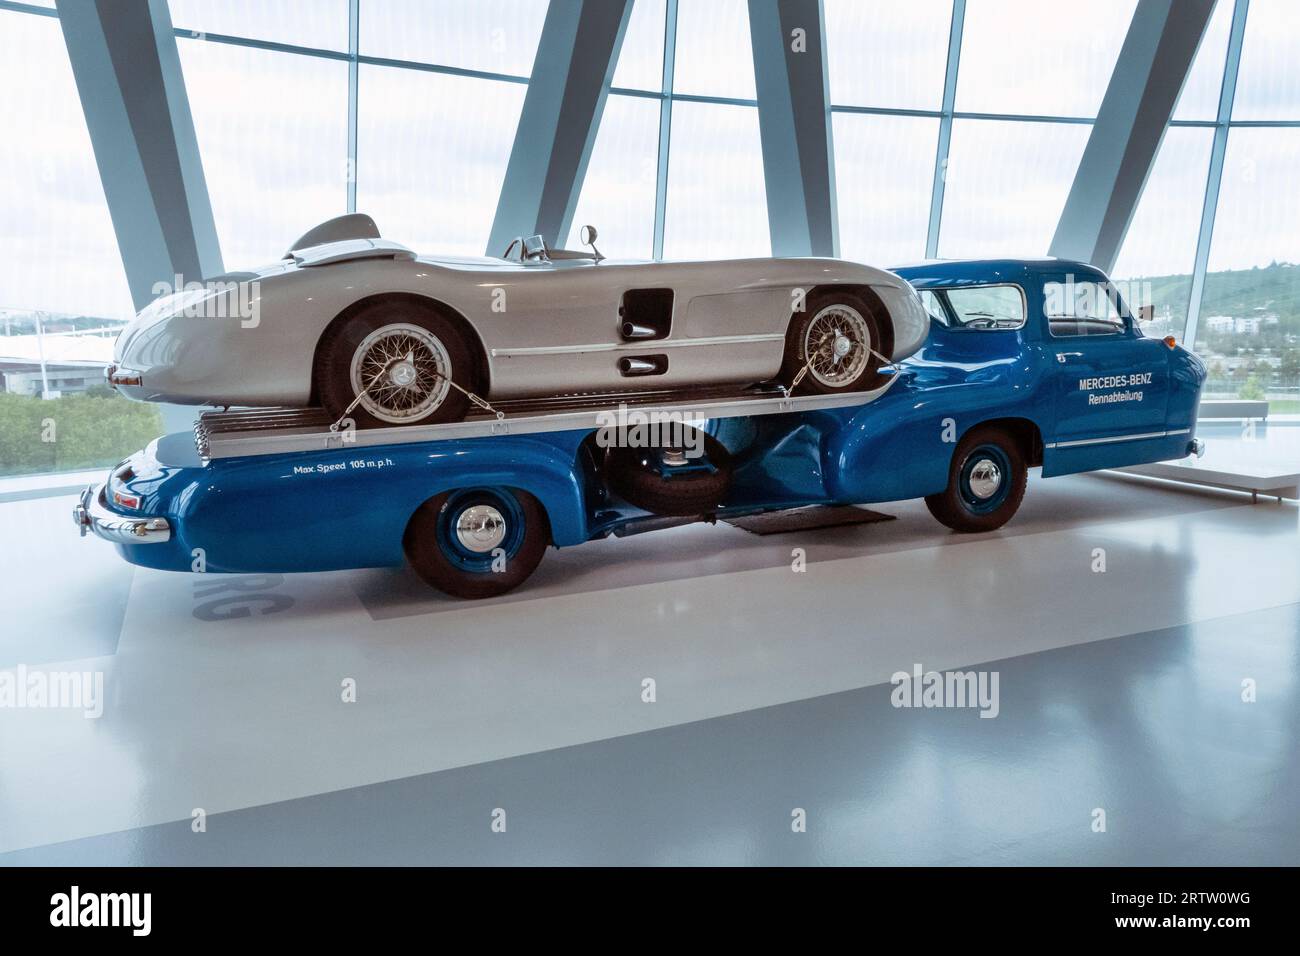 1955 Rennwagen-Schnell Transporter with Mercedes SLR racing car at the Mercedes-Benz Museum Stuttgart Germany Stock Photo